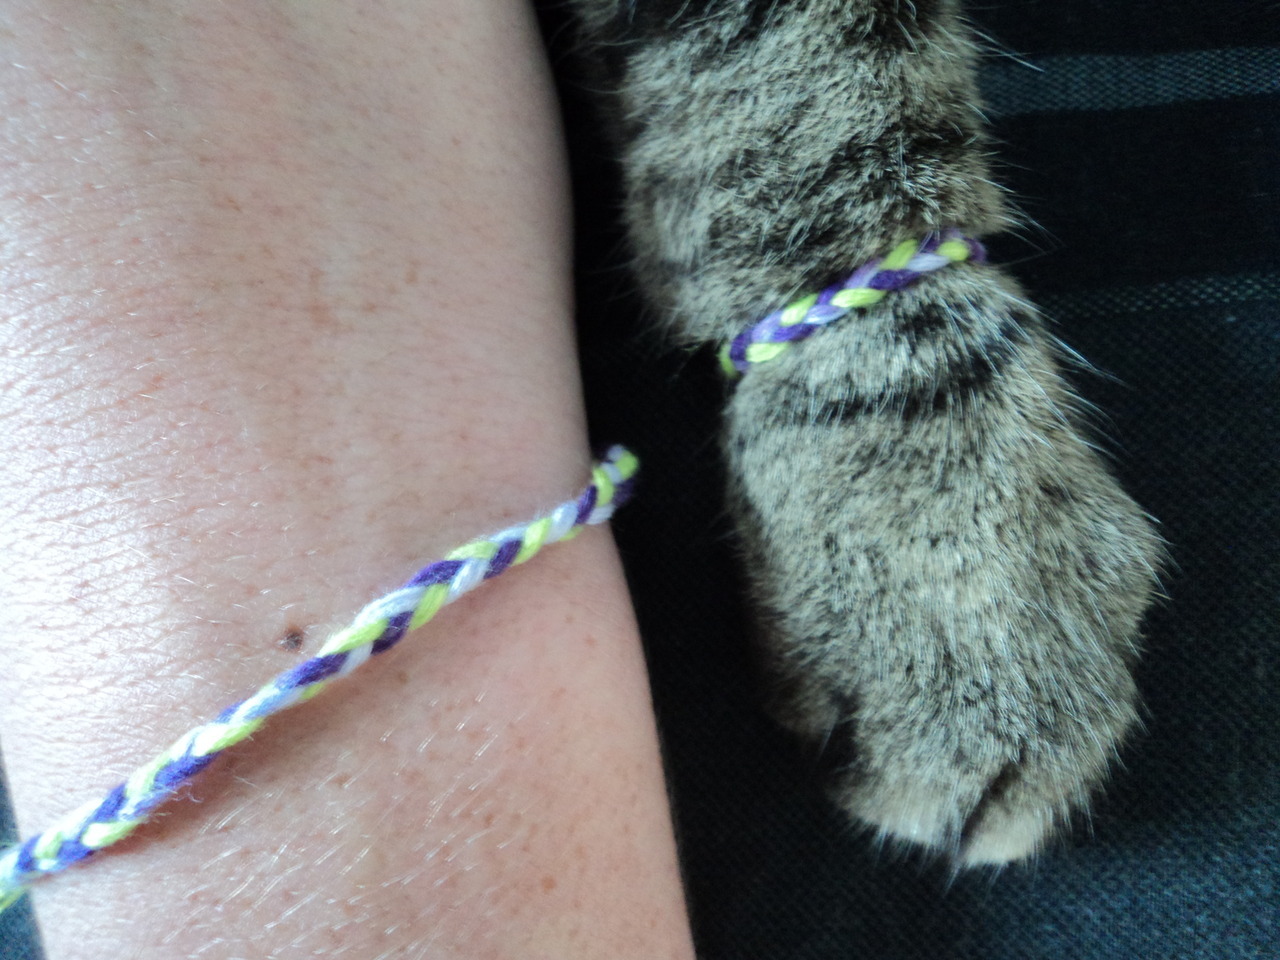 anclrew: one time i made friendship bracelets for my cat and i 